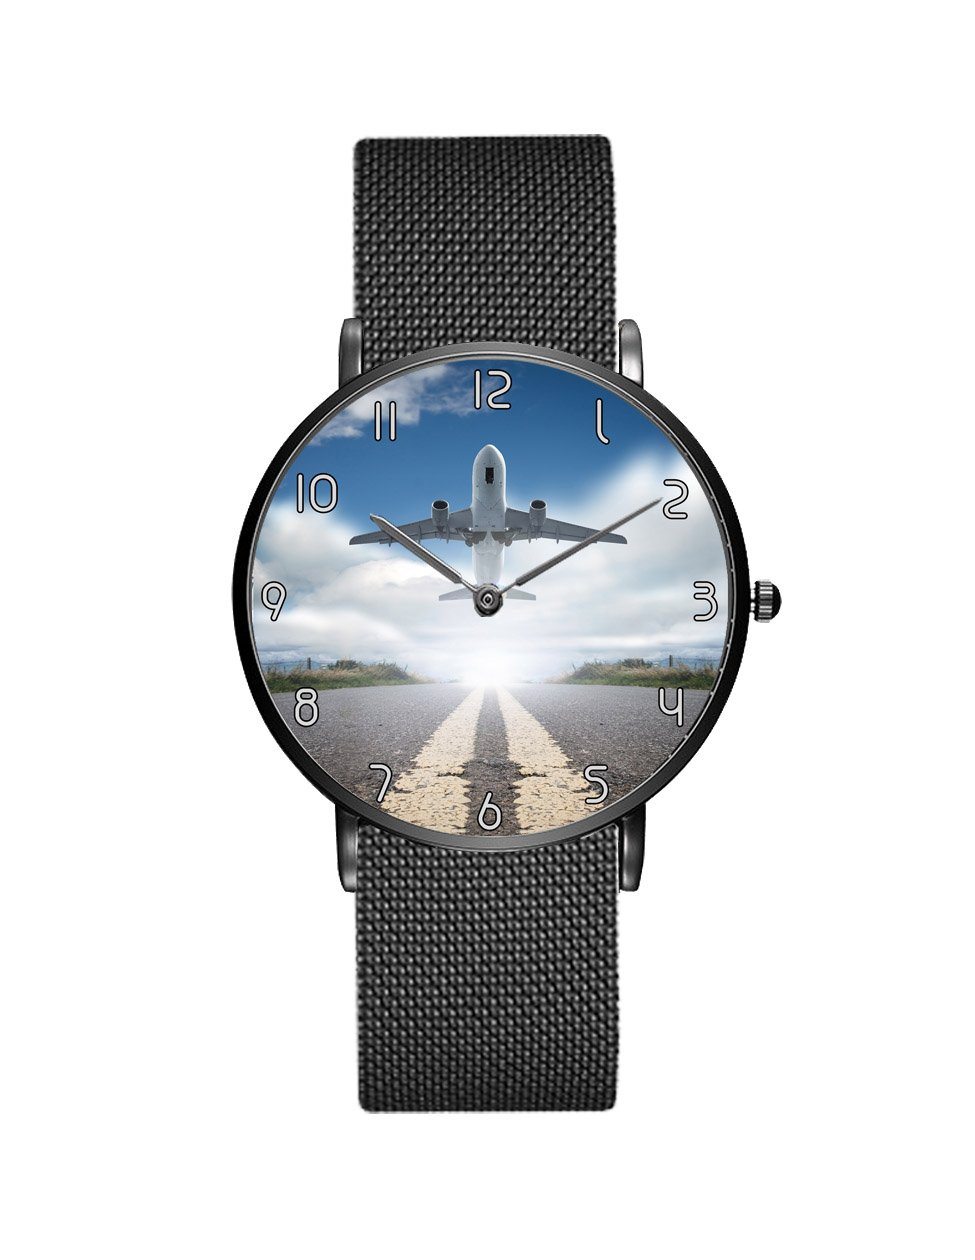 Taking Off Aircraft Printed Stainless Steel Strap Watches Aviation Shop Black & Stainless Steel Strap 